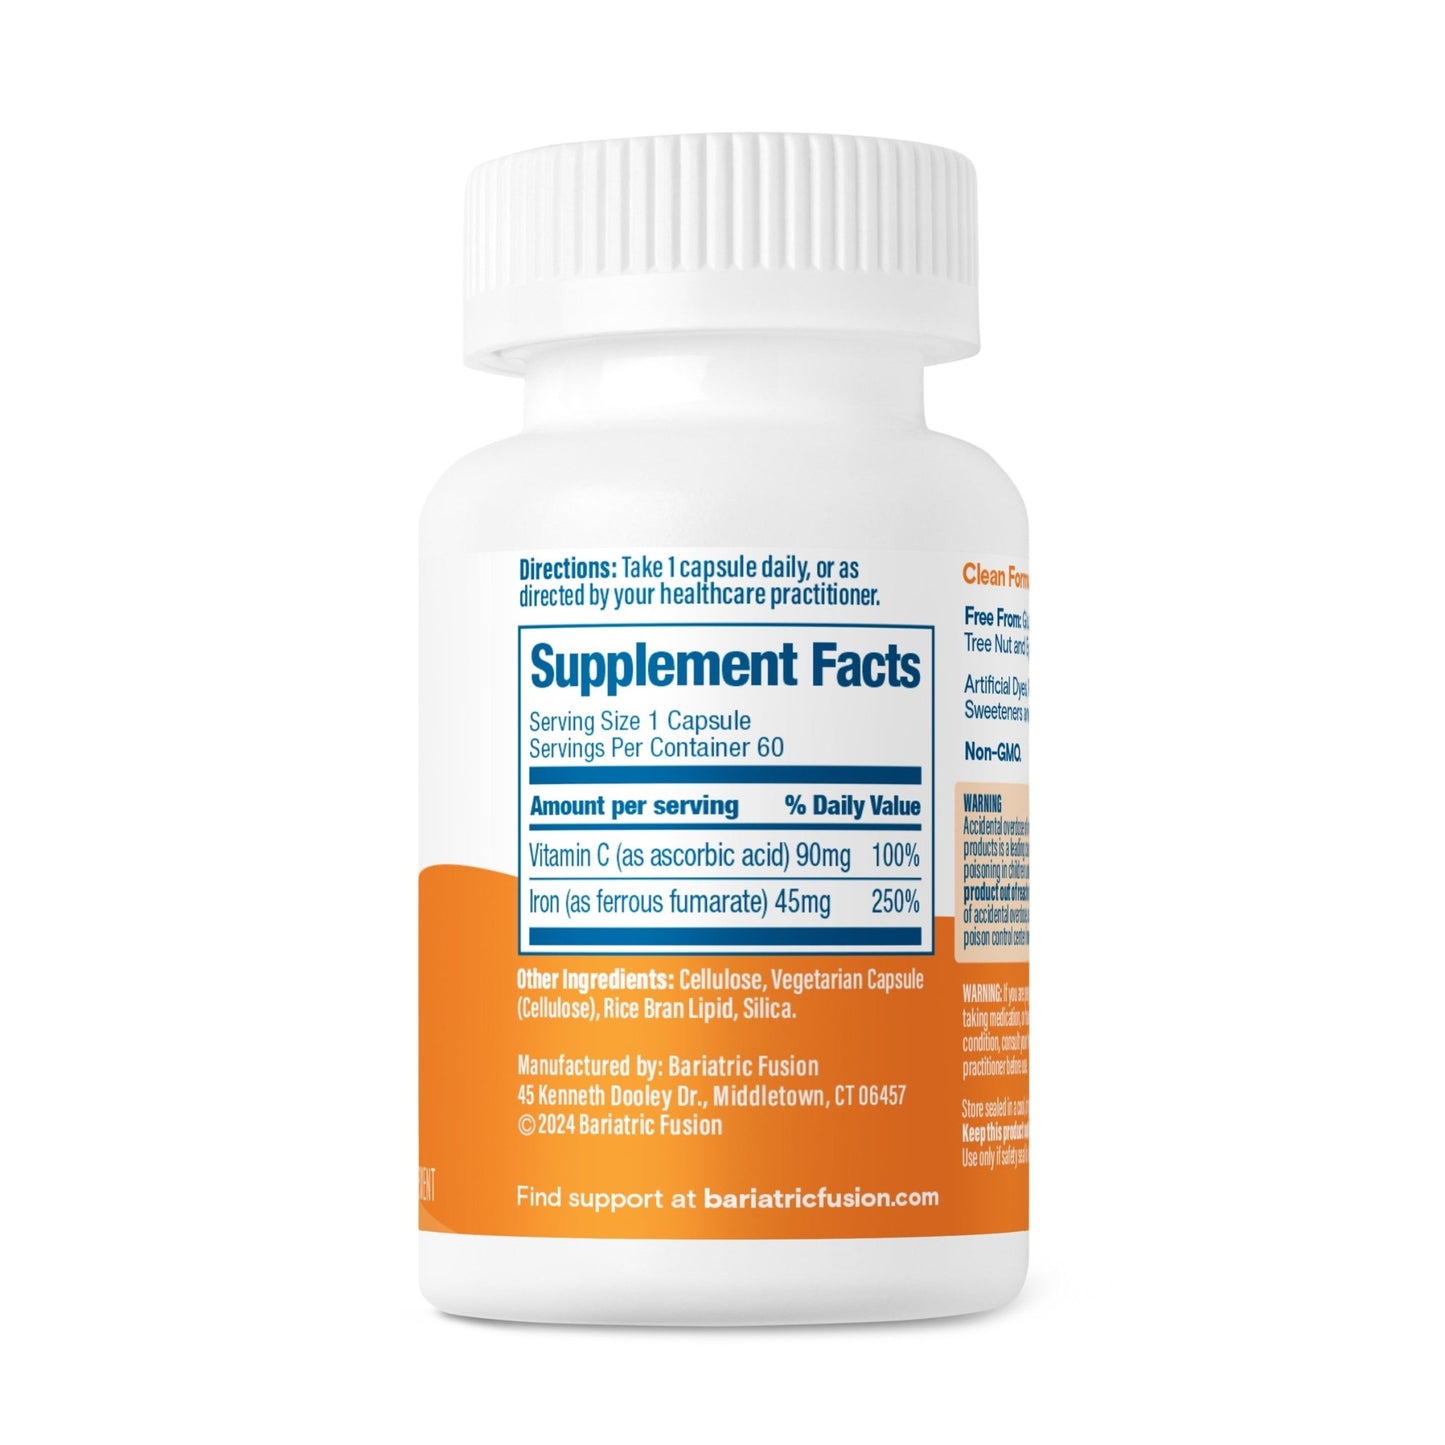 Bariatric Iron Capsule with Vitamin C 45mg iron directions, other ingredients, and servings.